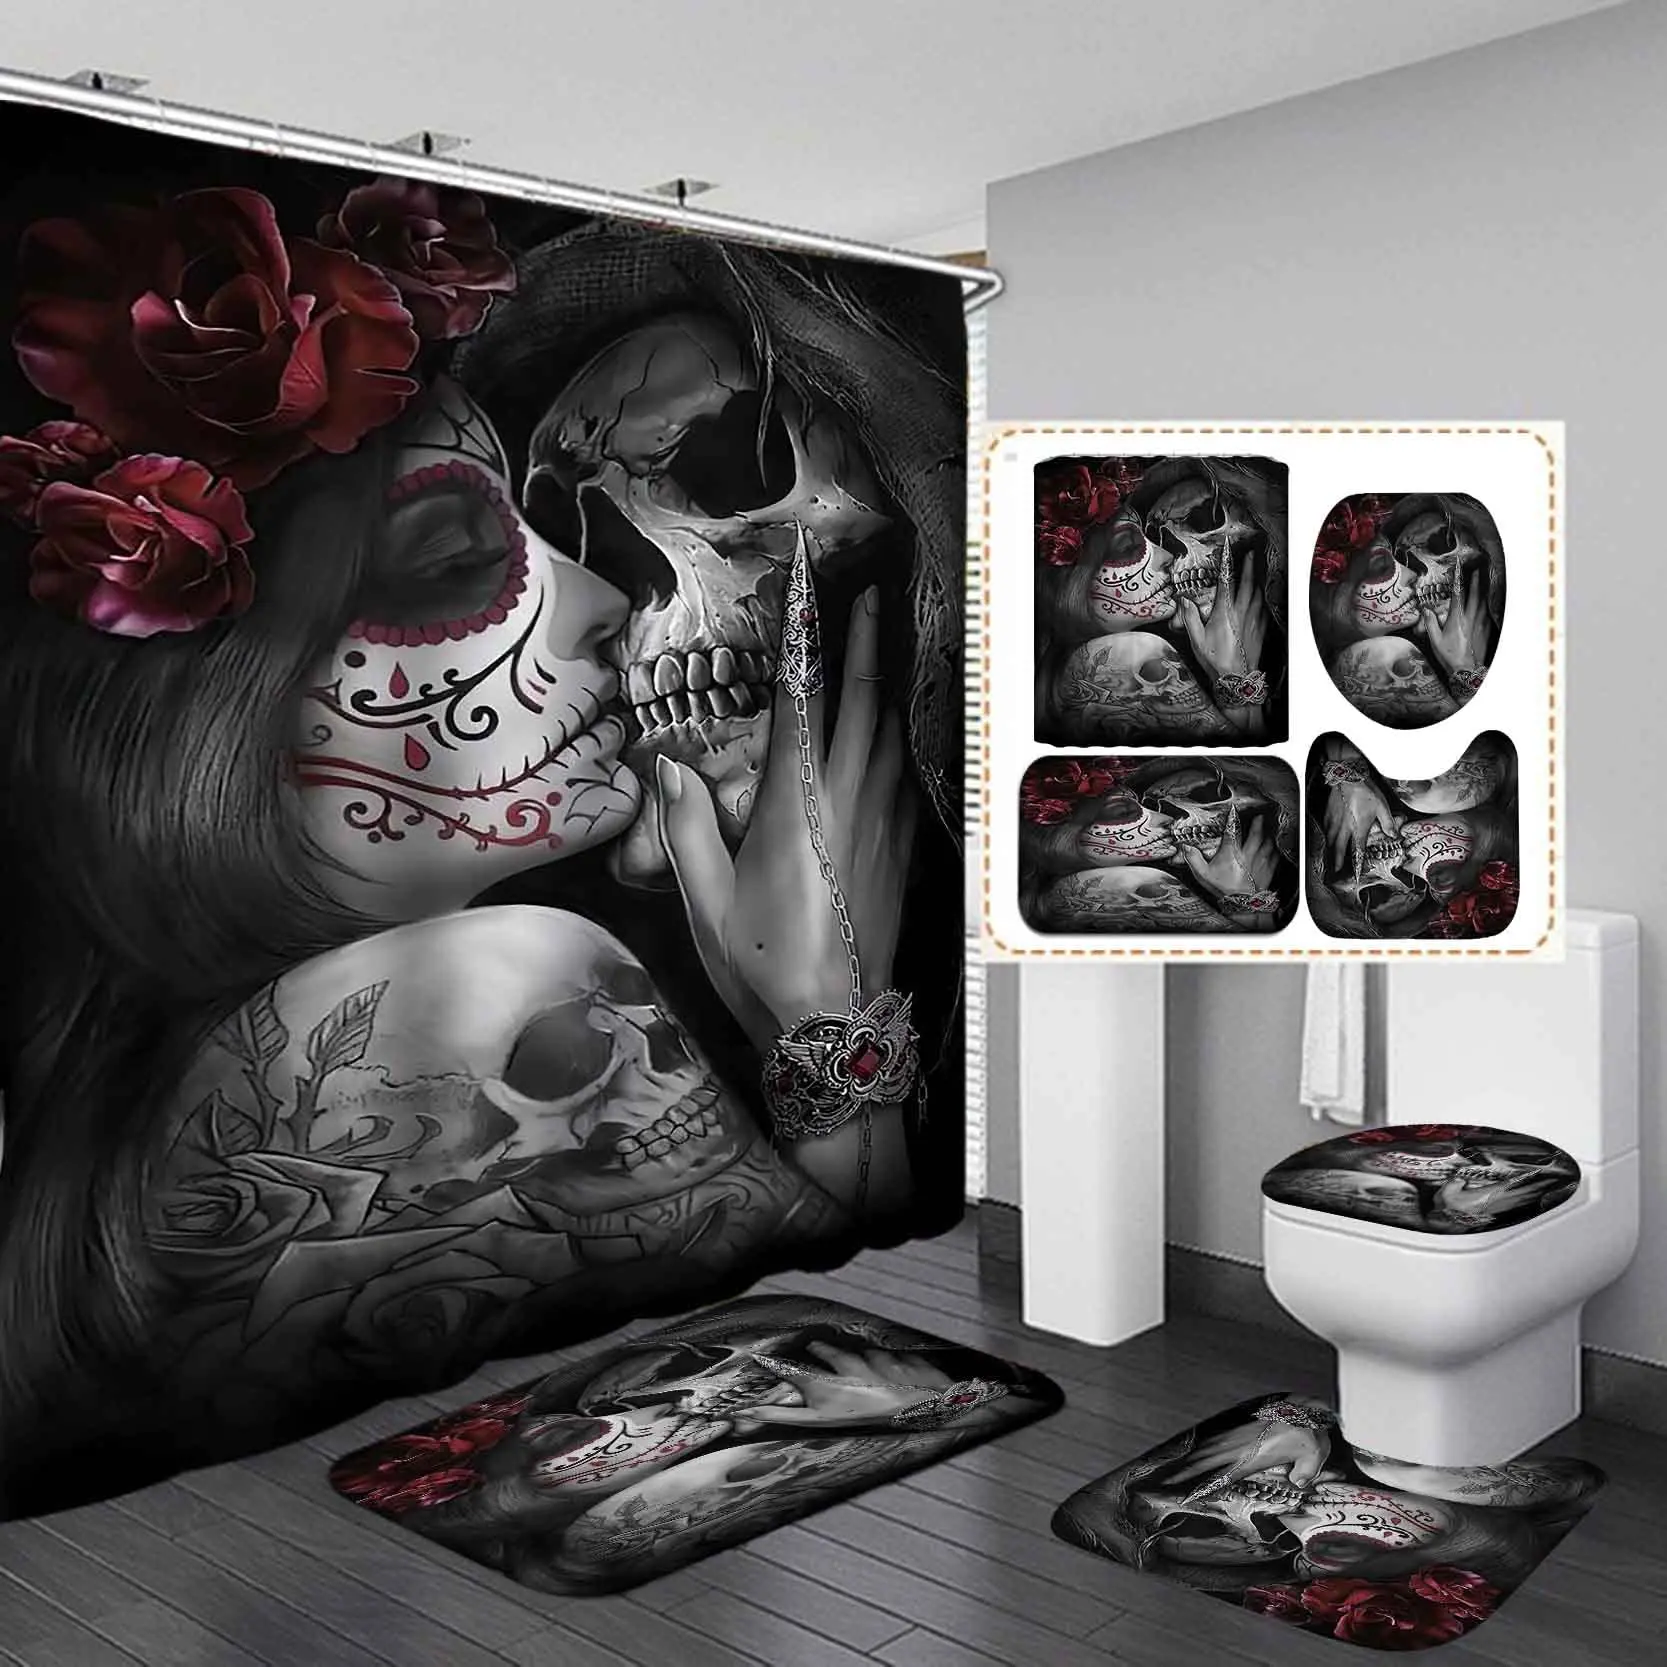 https://ae01.alicdn.com/kf/Sd10e8c6673794e2da243fd1d9b111f91o/Sugar-Skull-Shower-Curtain-Set-Day-of-The-Dead-Romantic-Skeleton-Couple-Motorcycle-Goth-Red-Rose.jpg